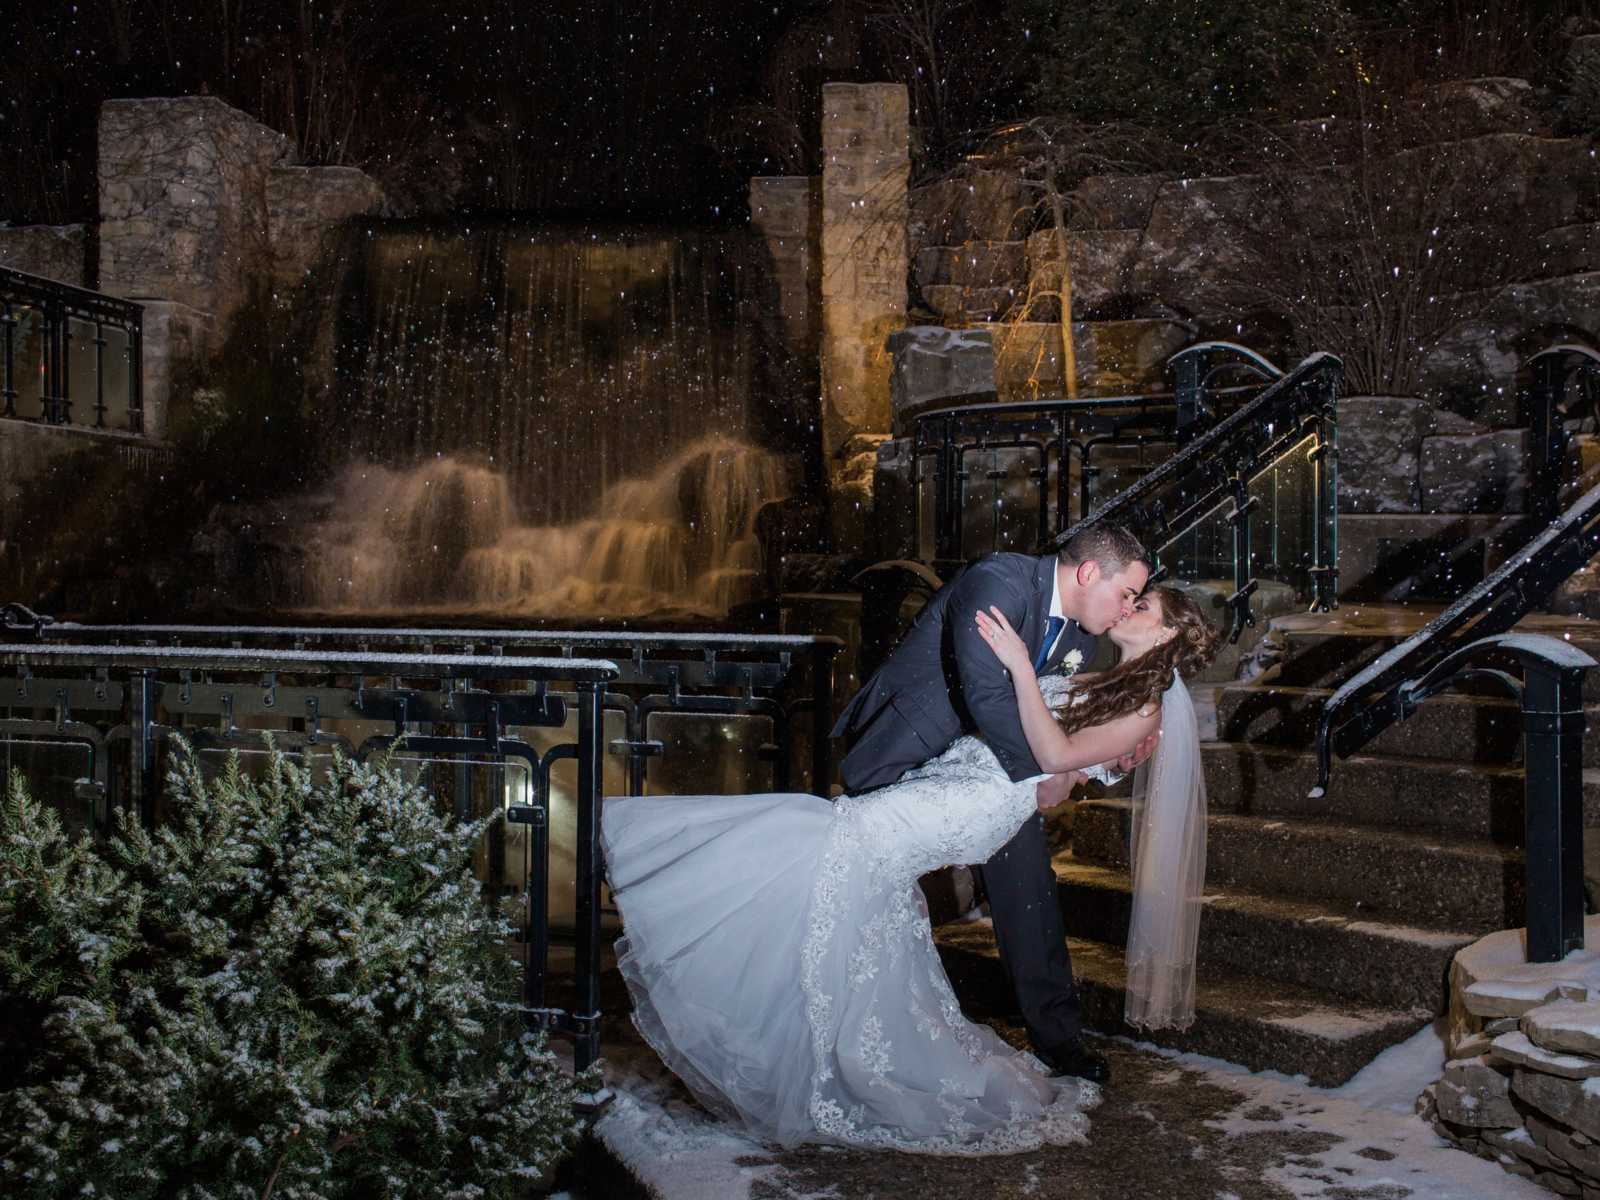 groom dips the bride in a kiss under the moonlight in front of waterfall